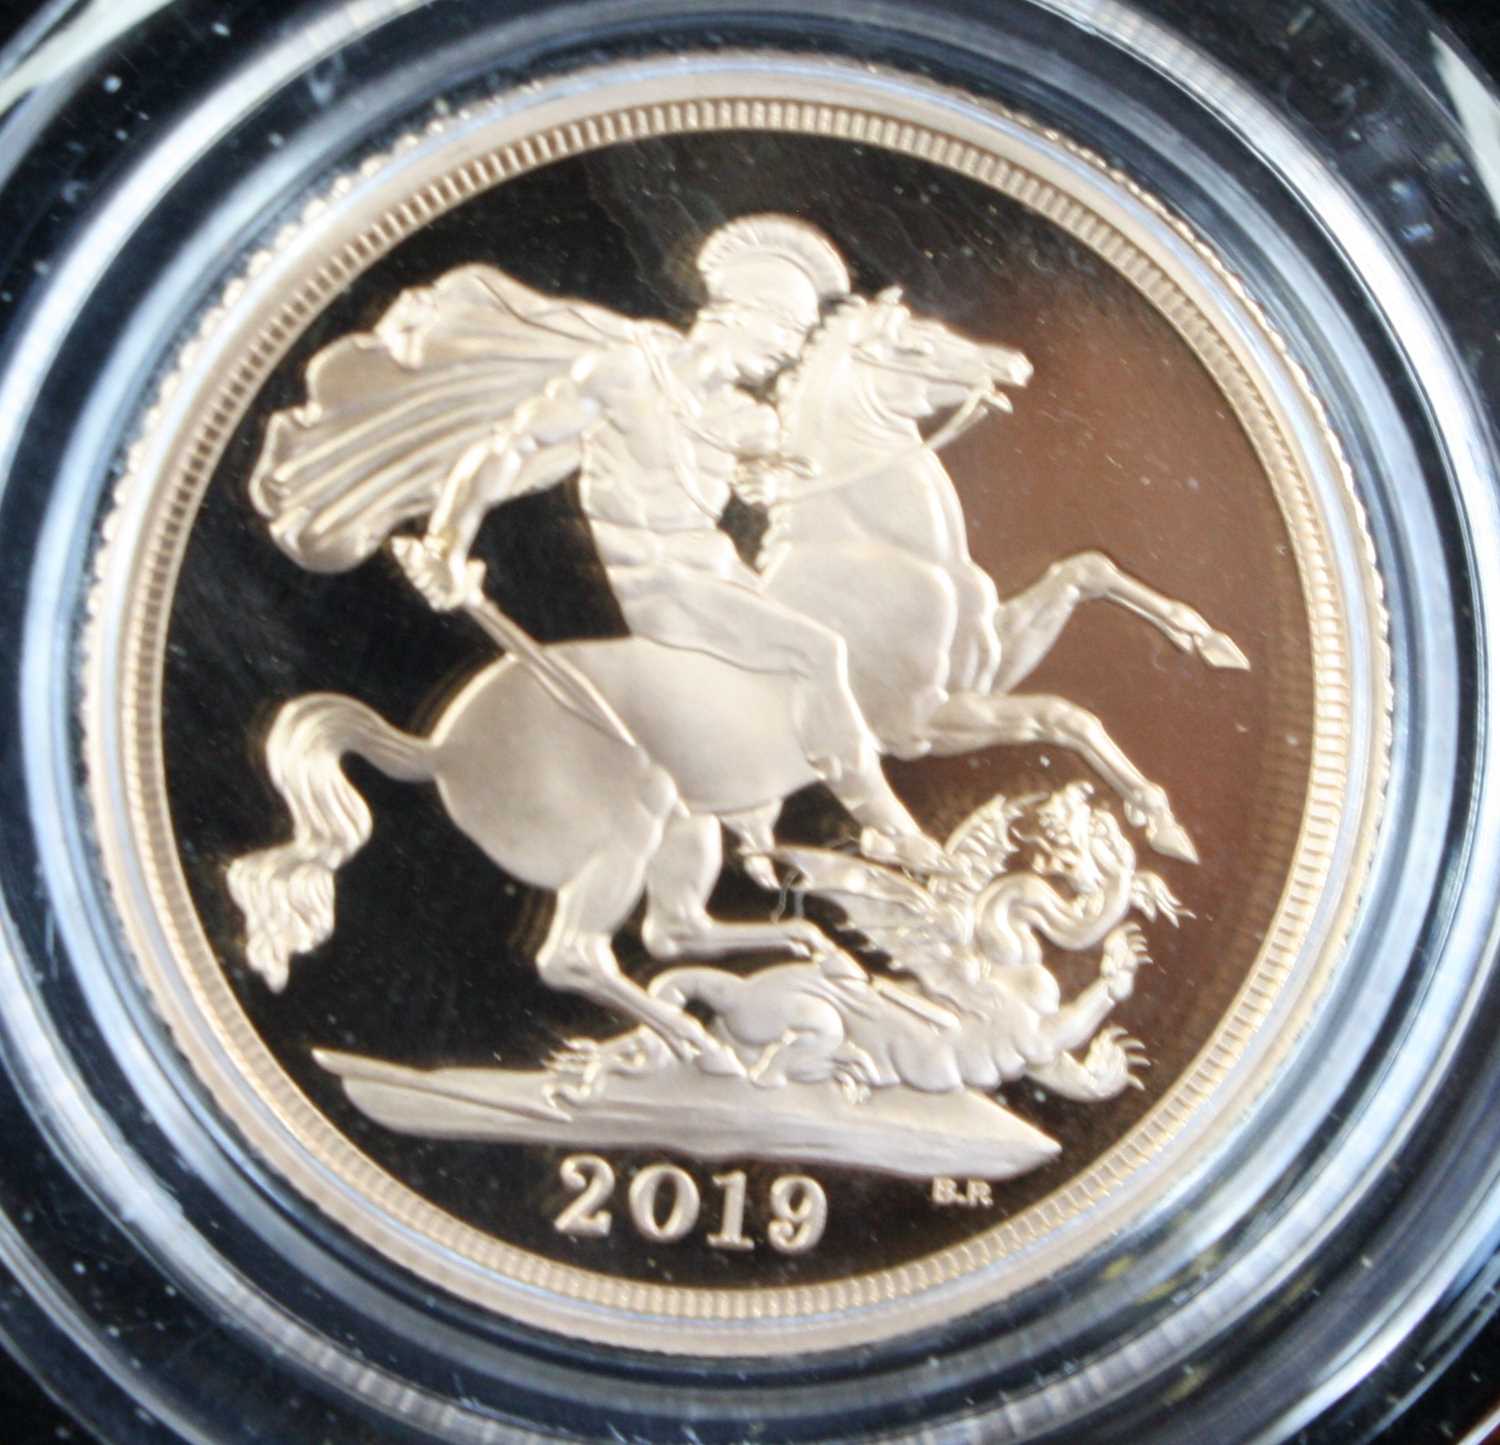 Great Britain, 2019 gold proof full sovereign, Elizabeth II, rev: St George and Dragon above date, - Image 2 of 3